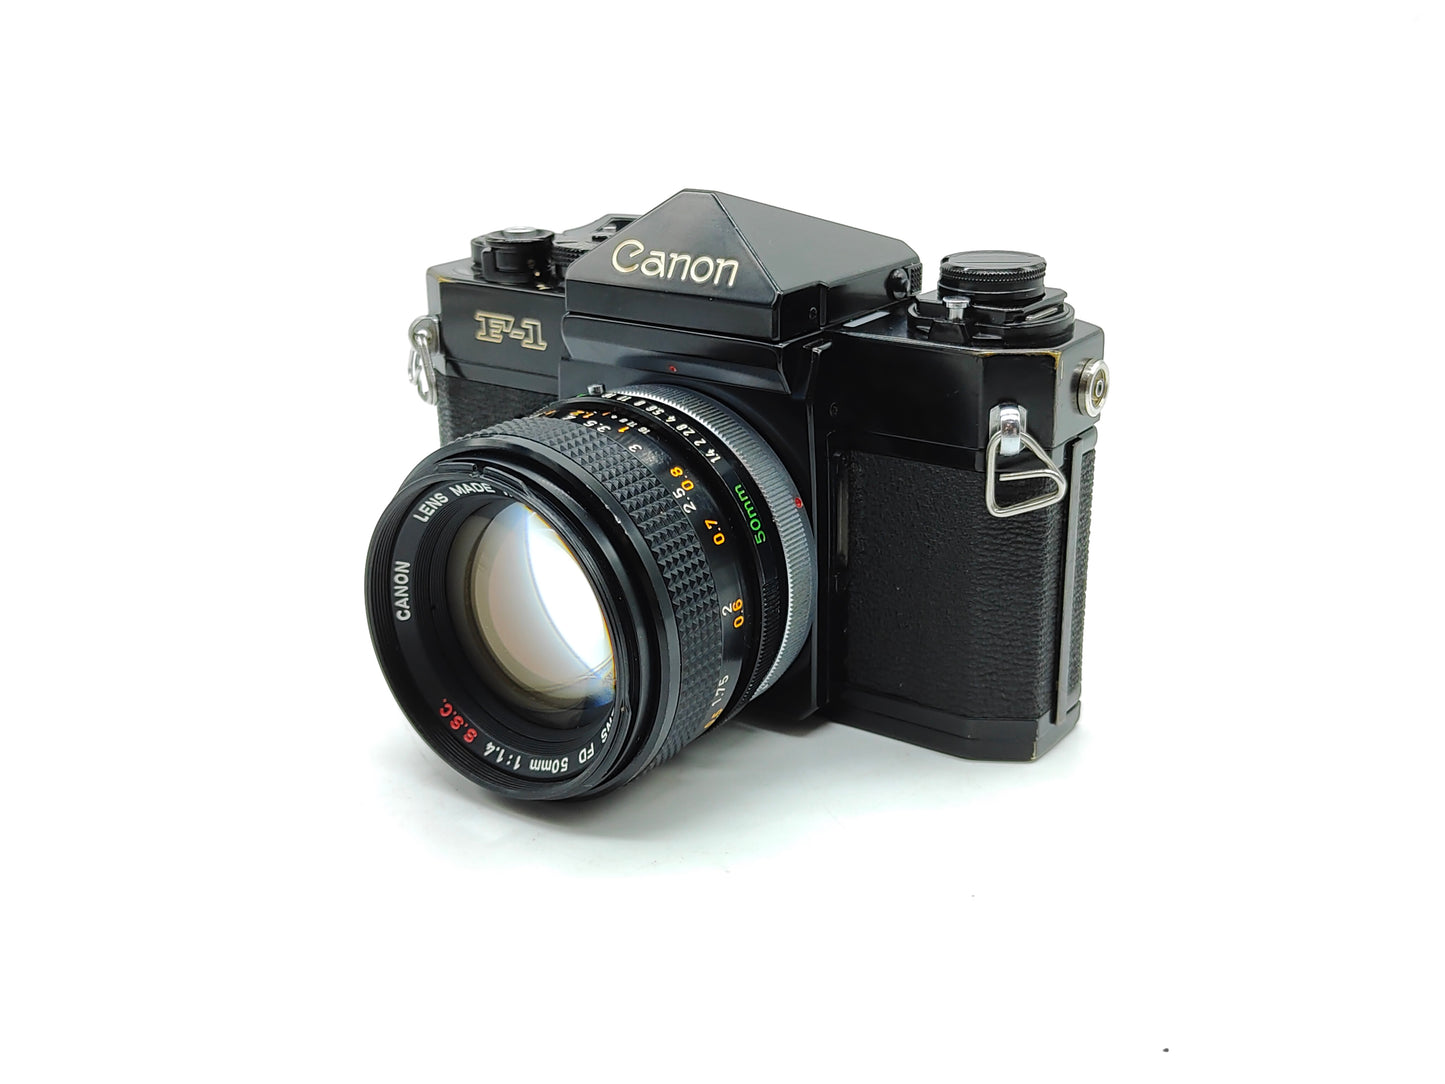 Canon F-1 SLR camera with 50mm f/1.4 lens